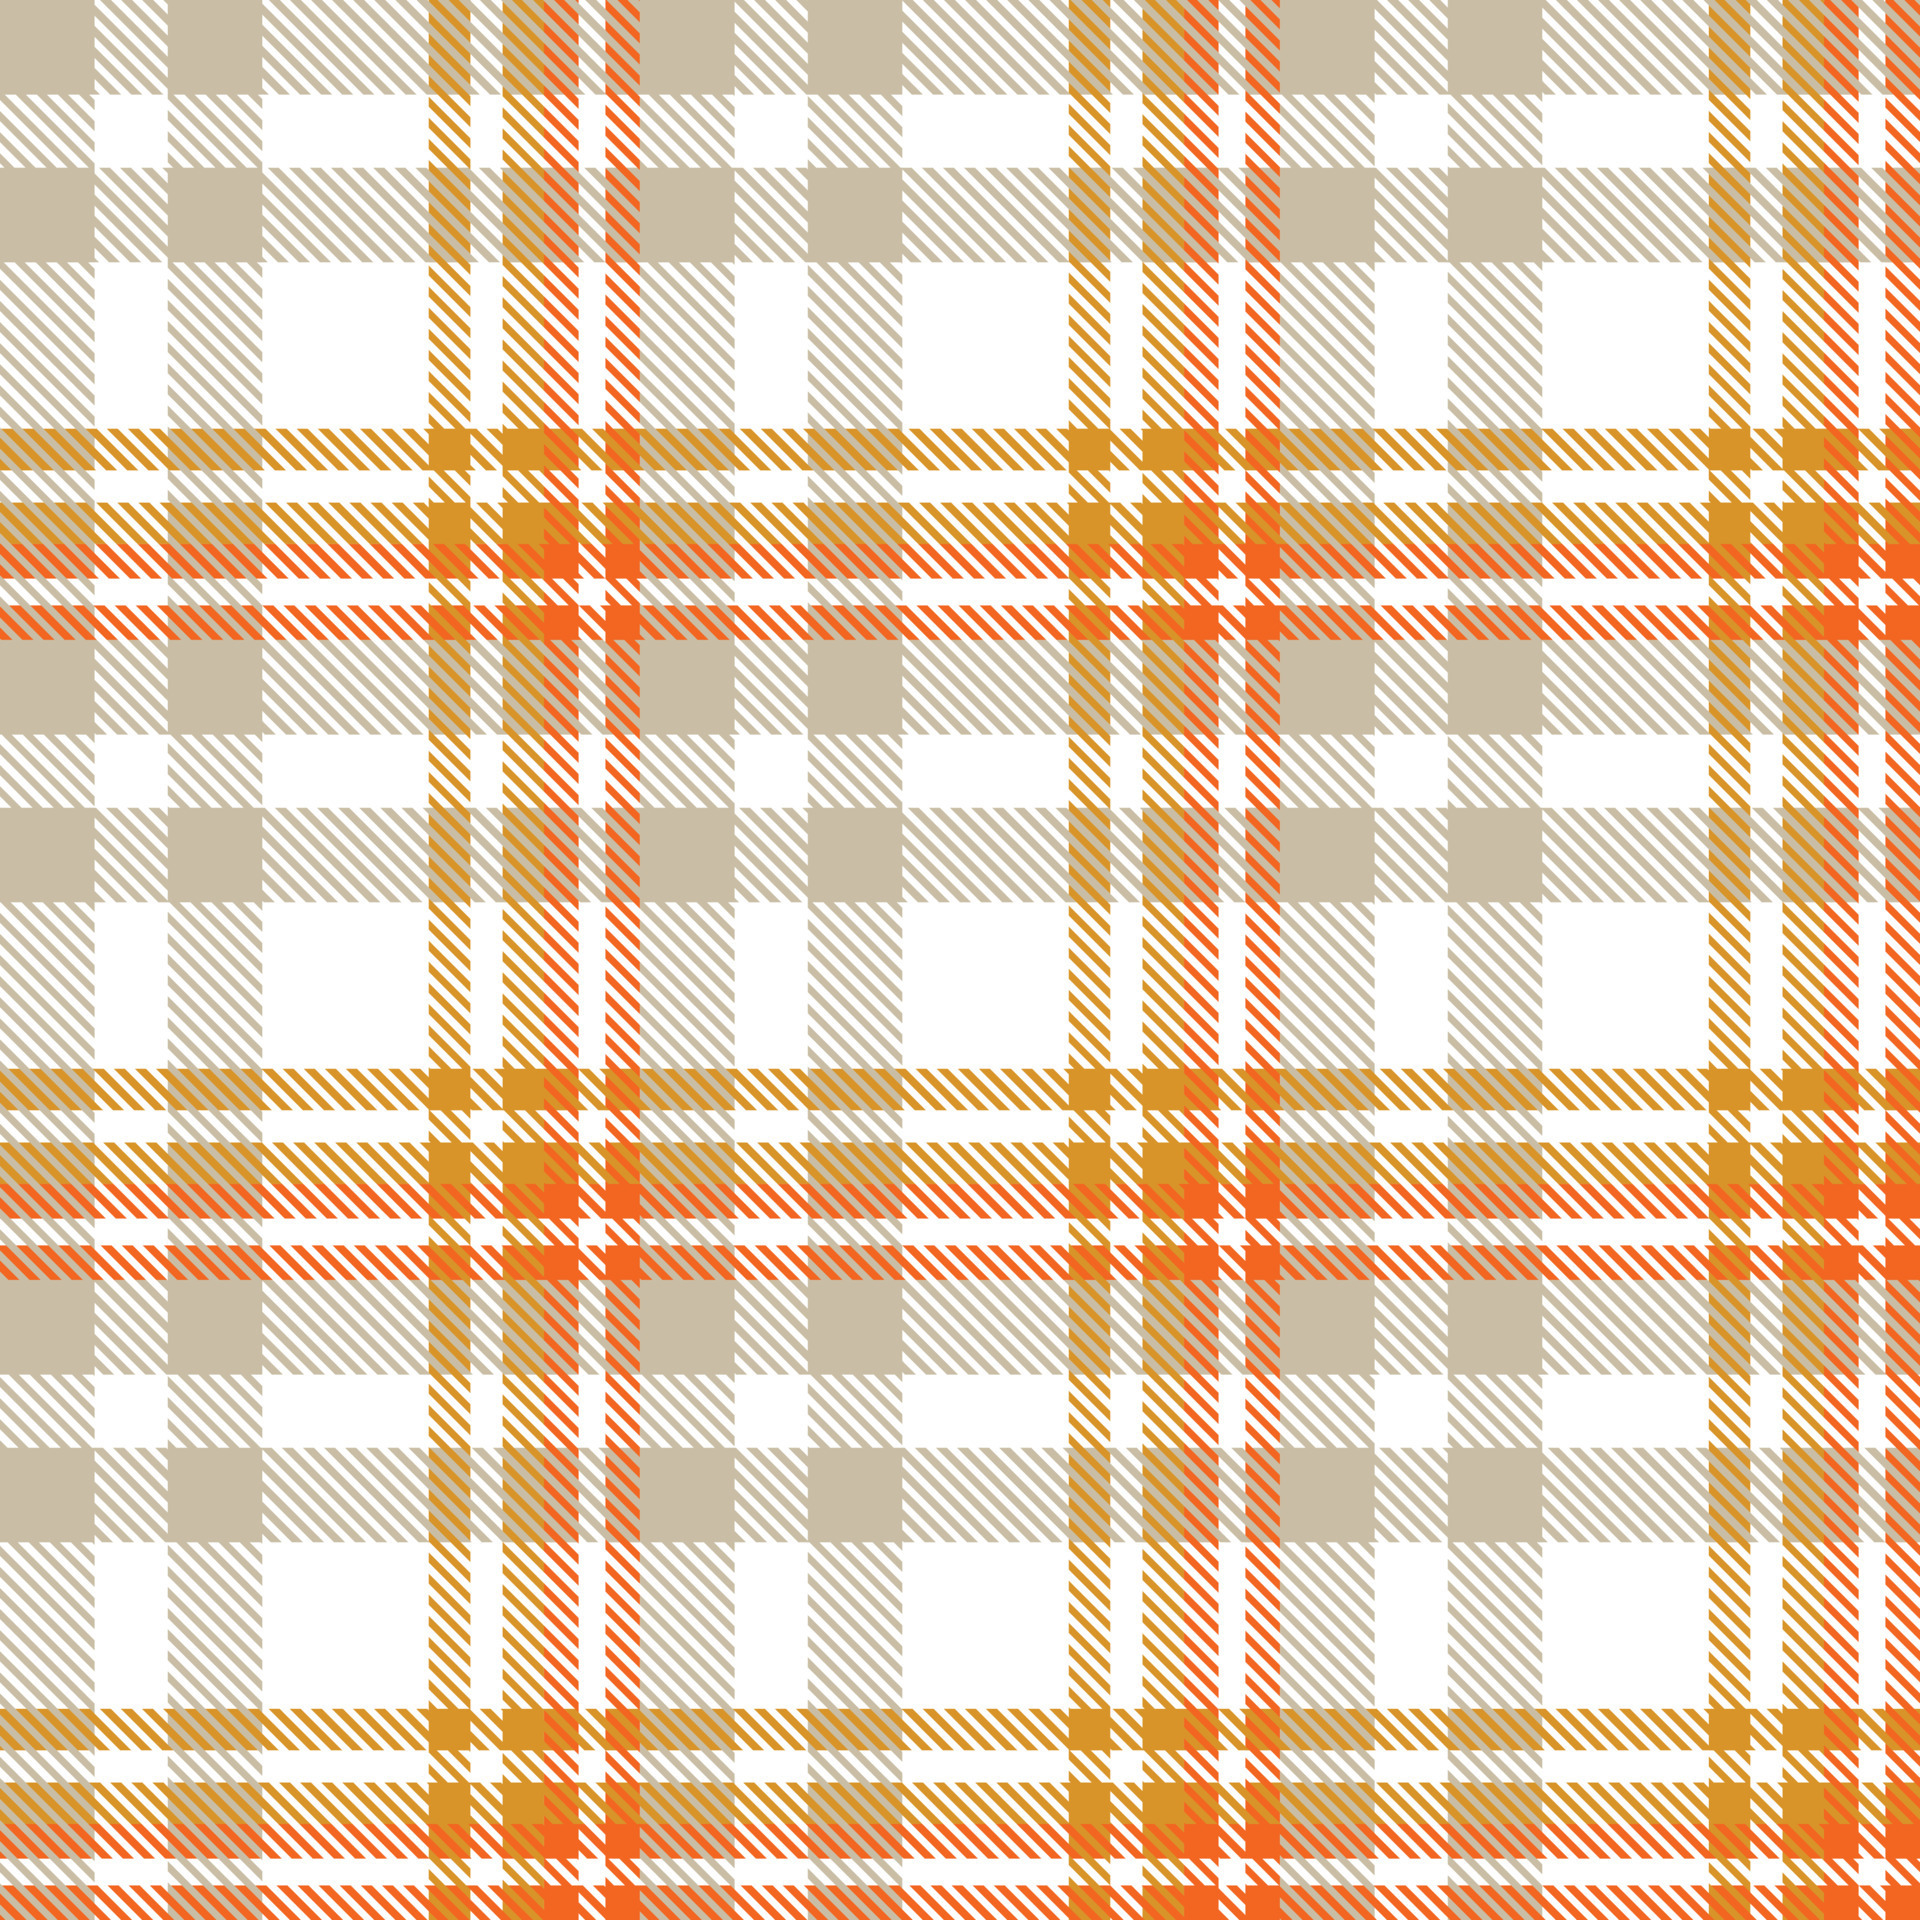 tartan pattern fabric vector design is made with alternating bands of ...